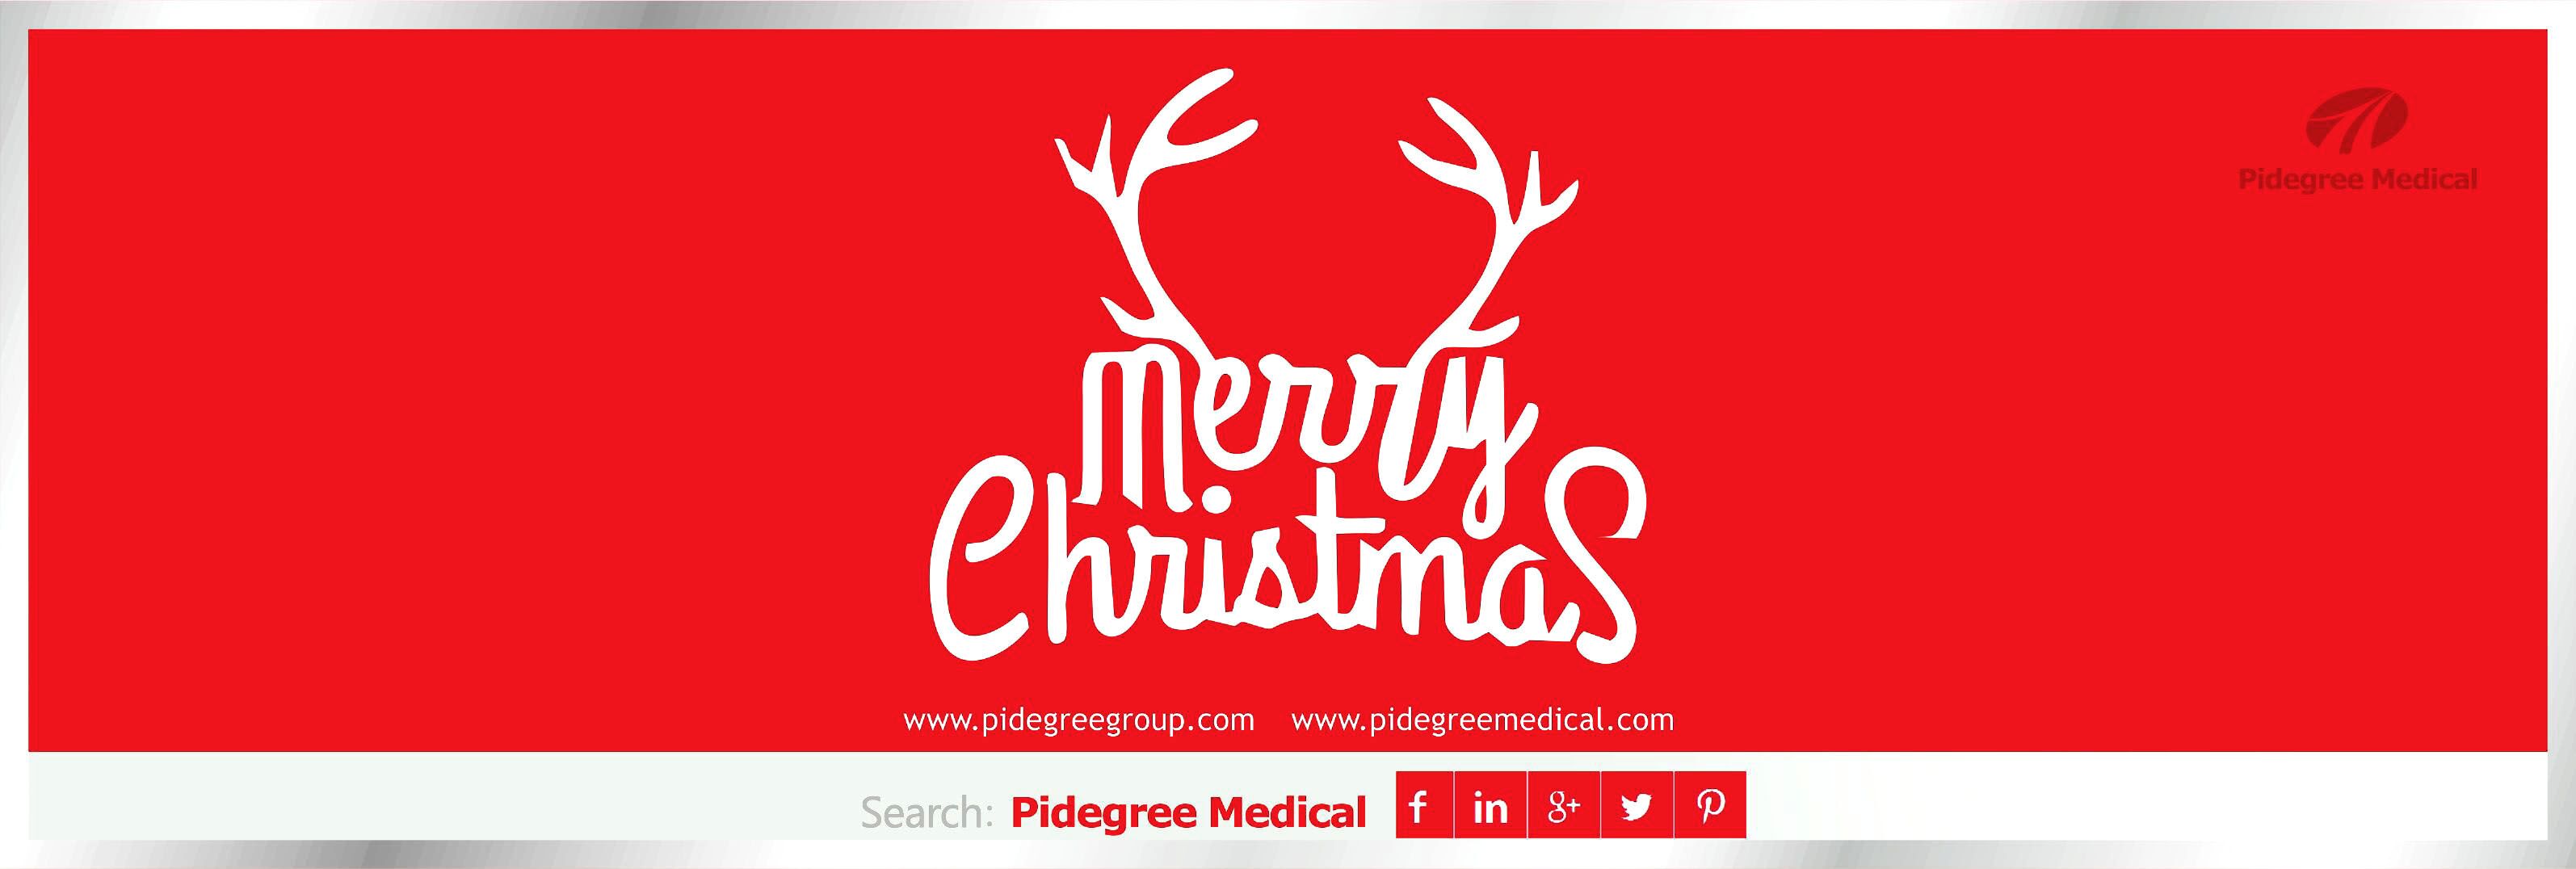 You have received a Christmas greeting card from Pidegree Group! 